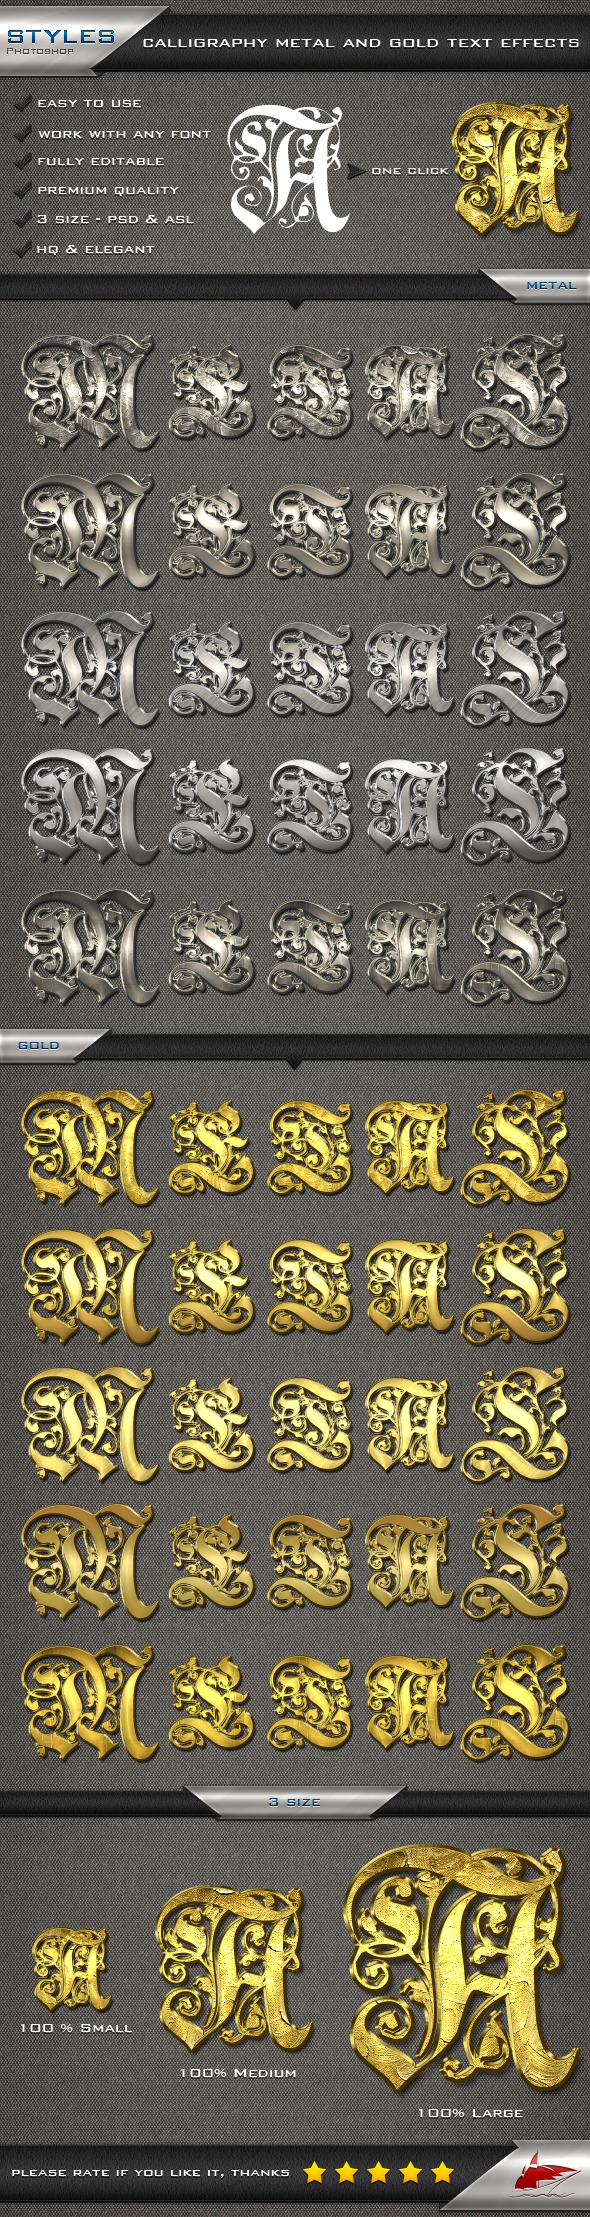 Calligraphy Metal and Gold Text Effects